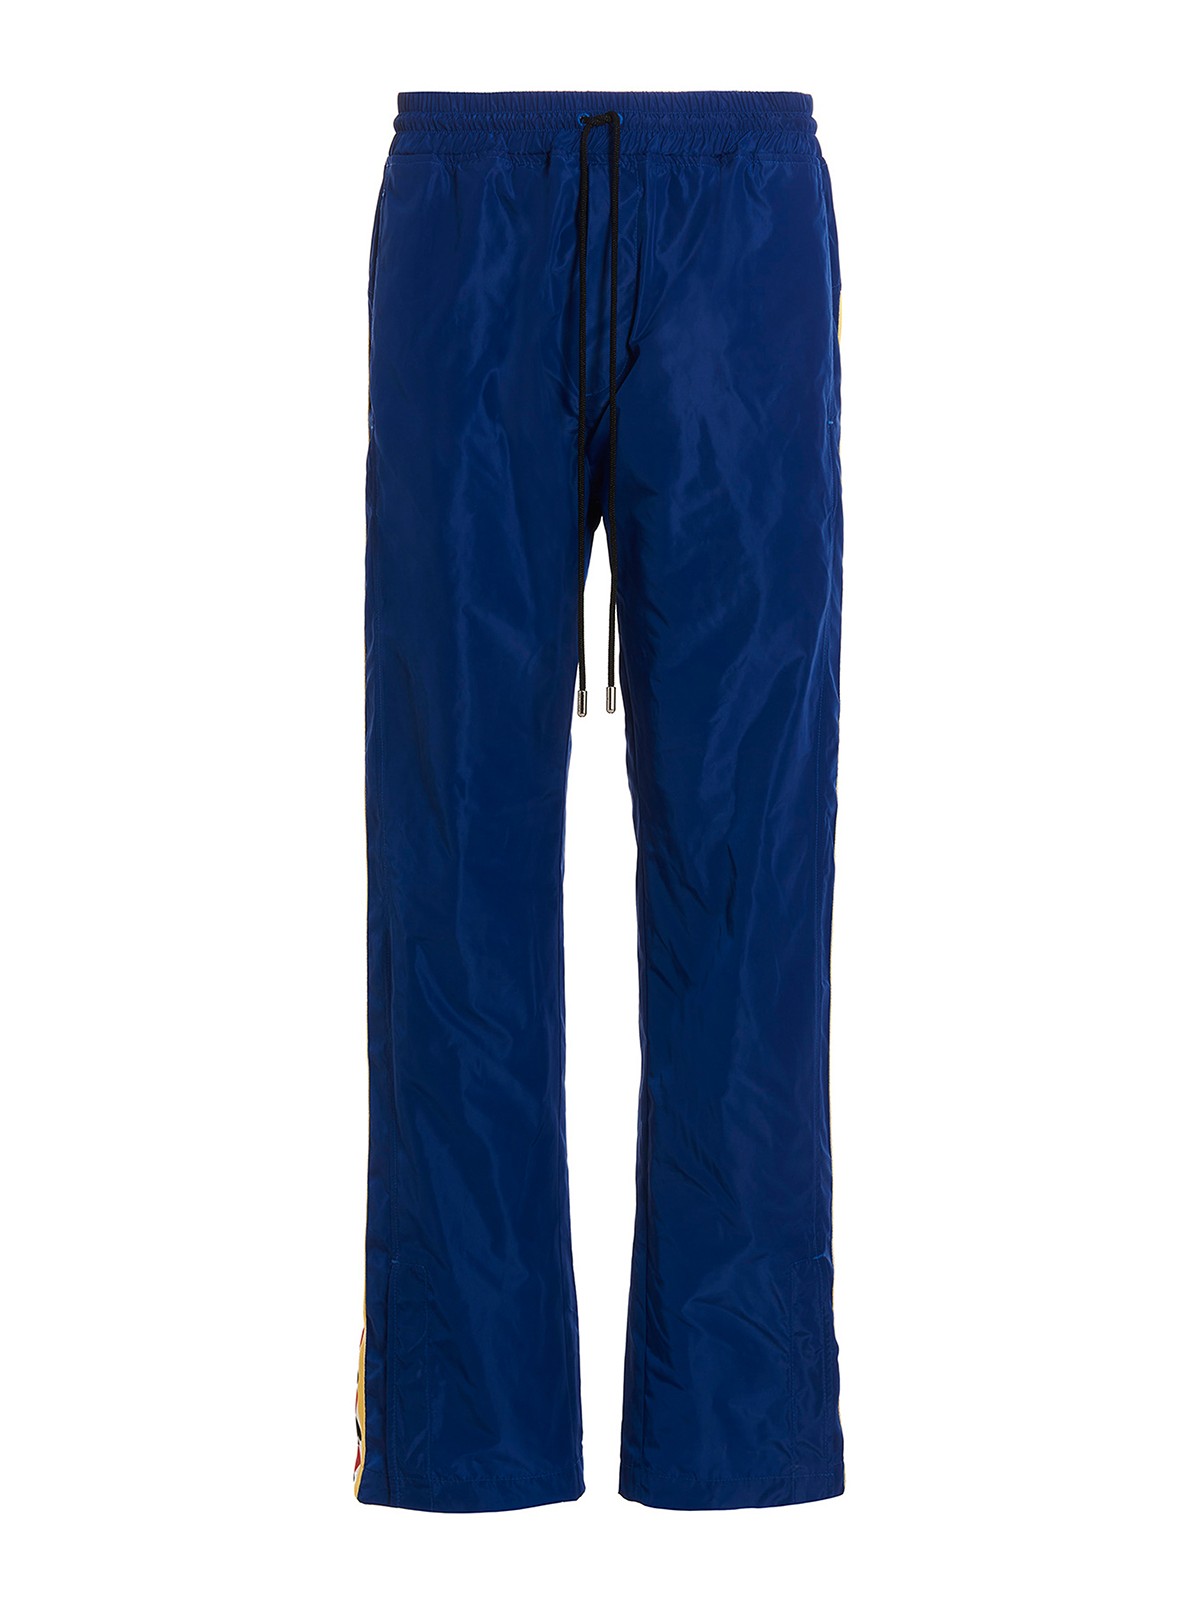 Shop Just Don Pants In Azul